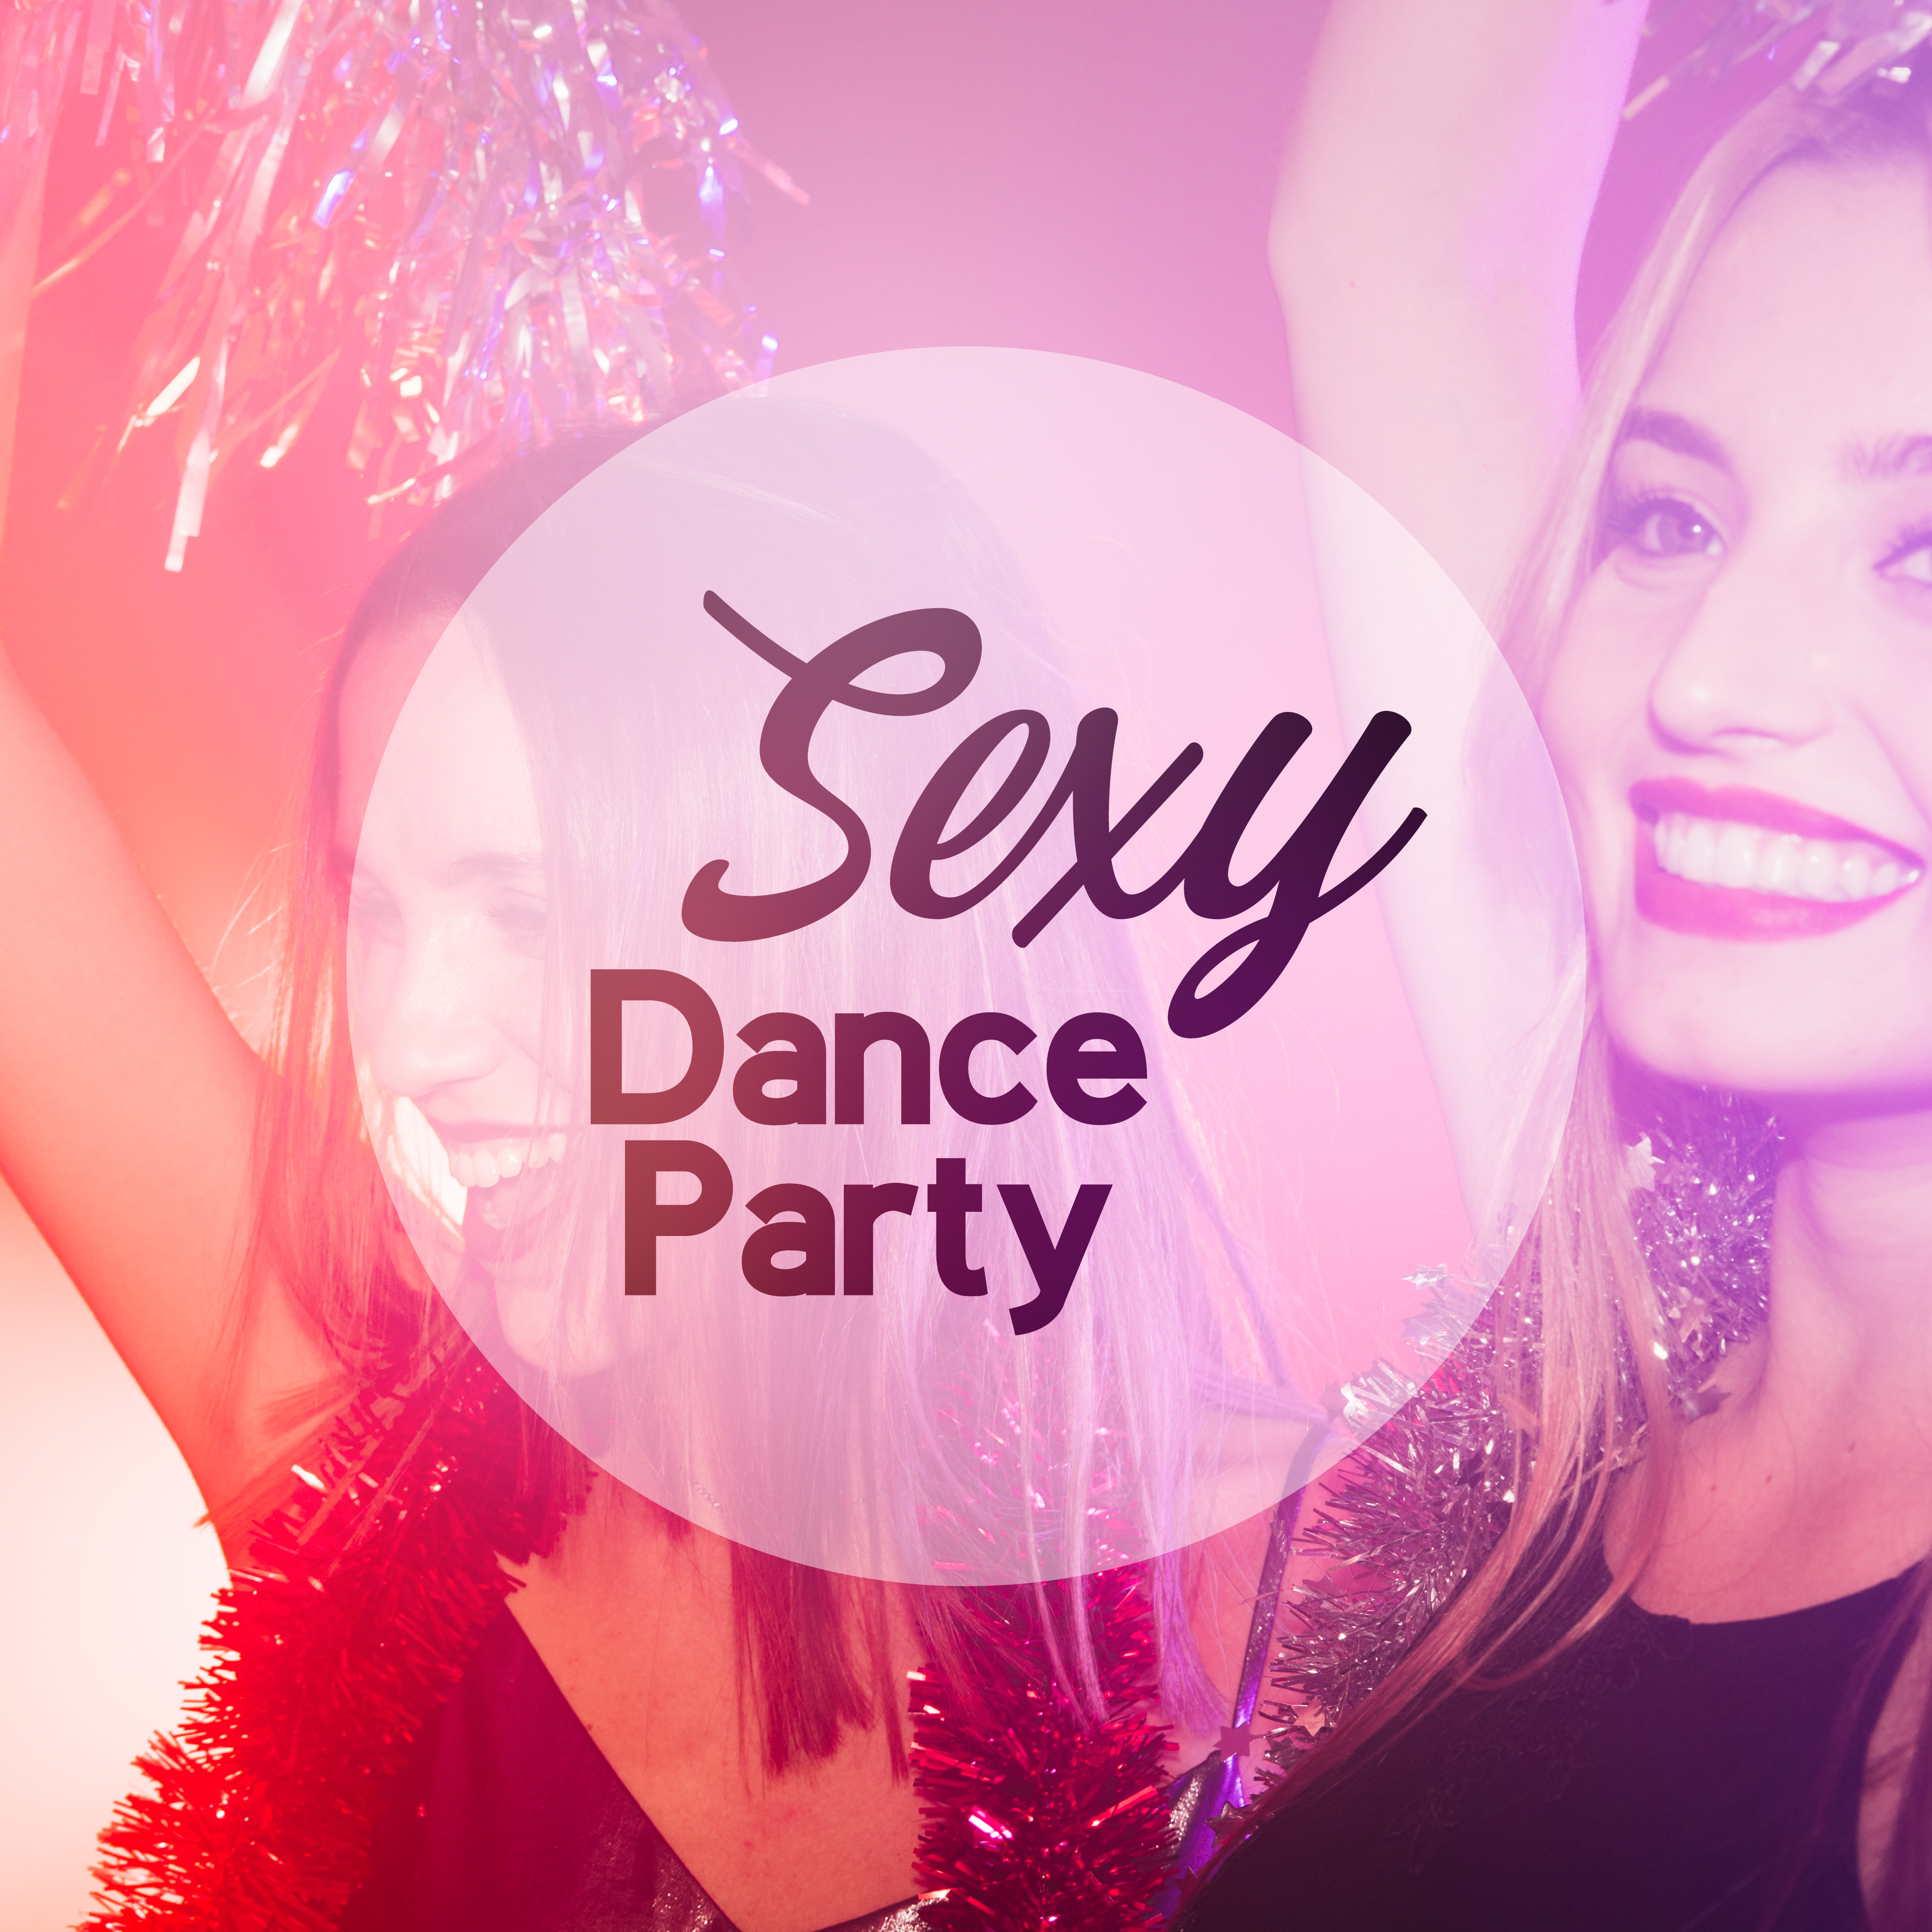 **** Dance Party: Electro Club Music for Hot Parties, Sensual Dance, Flirting and Great Fun for a Couple or Friends